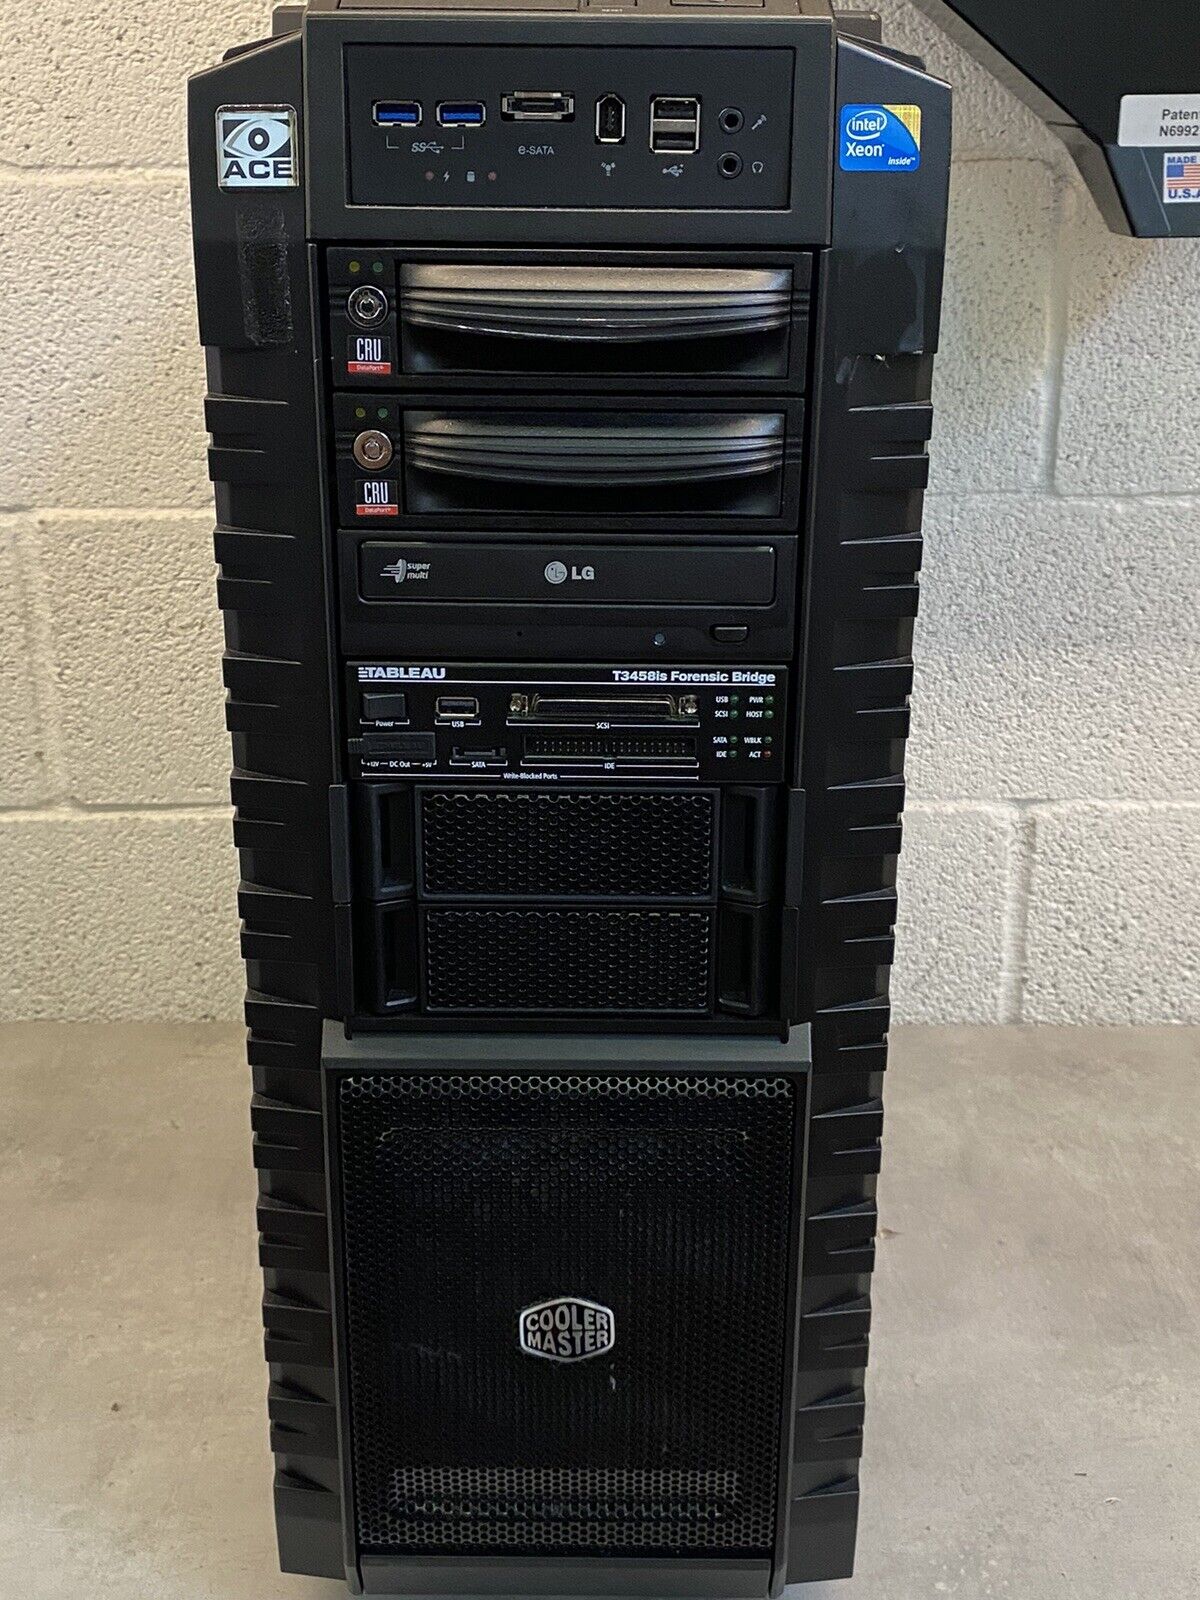 Ace Computer with Supermicro X8DA3 Motherboard - Tableau T3458is Forensic Bridge